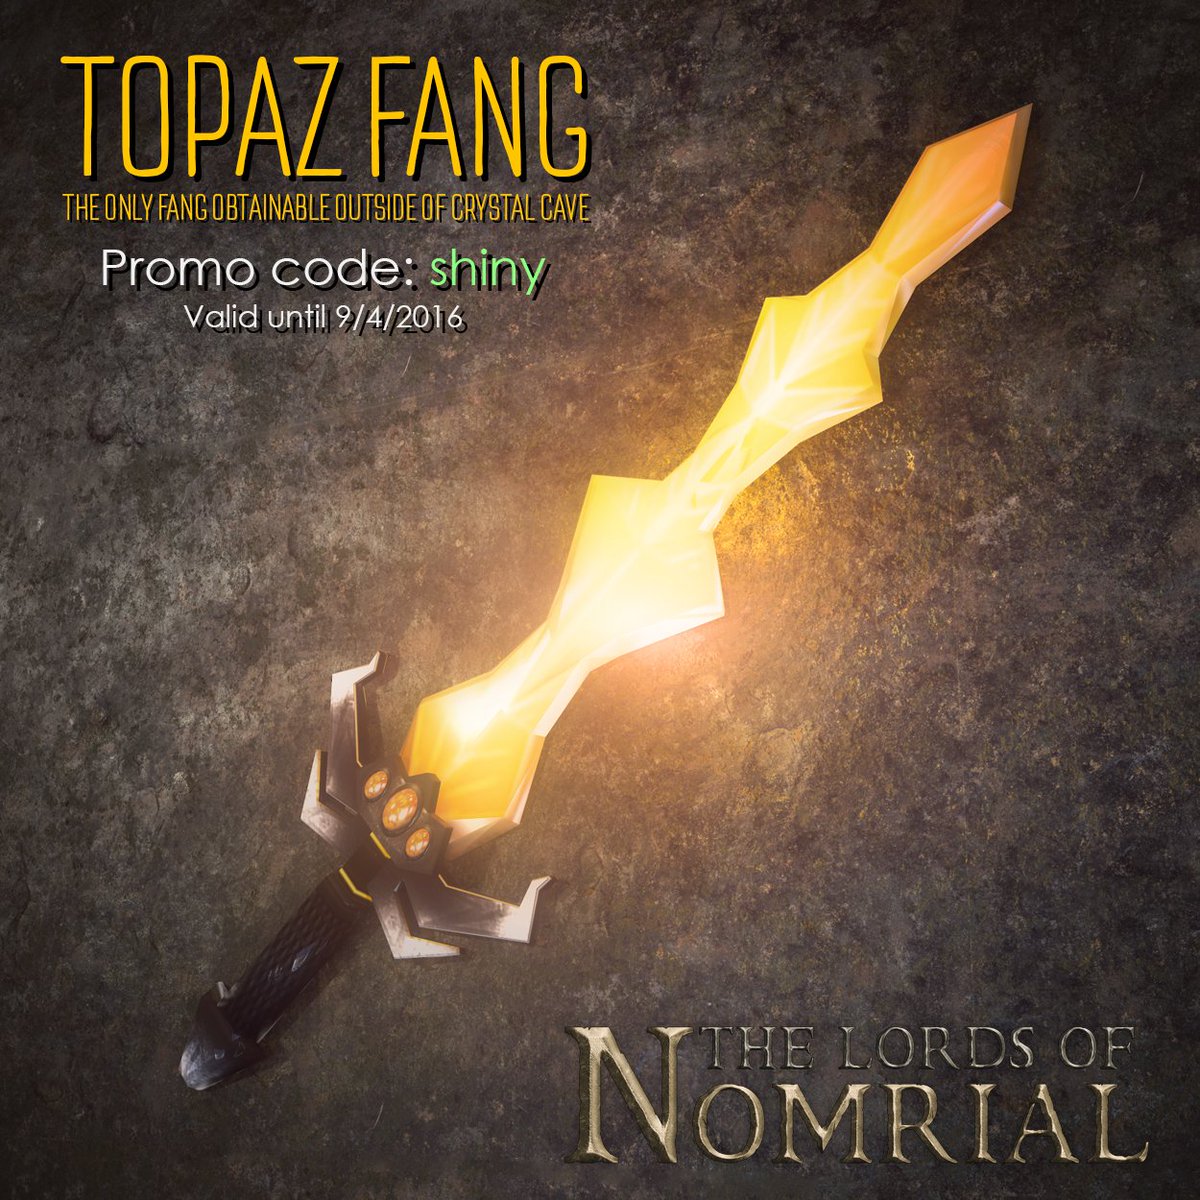 Youri Hoek On Twitter The Lords Of Nomrial Enter Code Shiny In The Main Menu To Receive A Topaz Fang The Code Will Expire 9 4 2016 - youri hoek on twitter free robux if you dont send me a